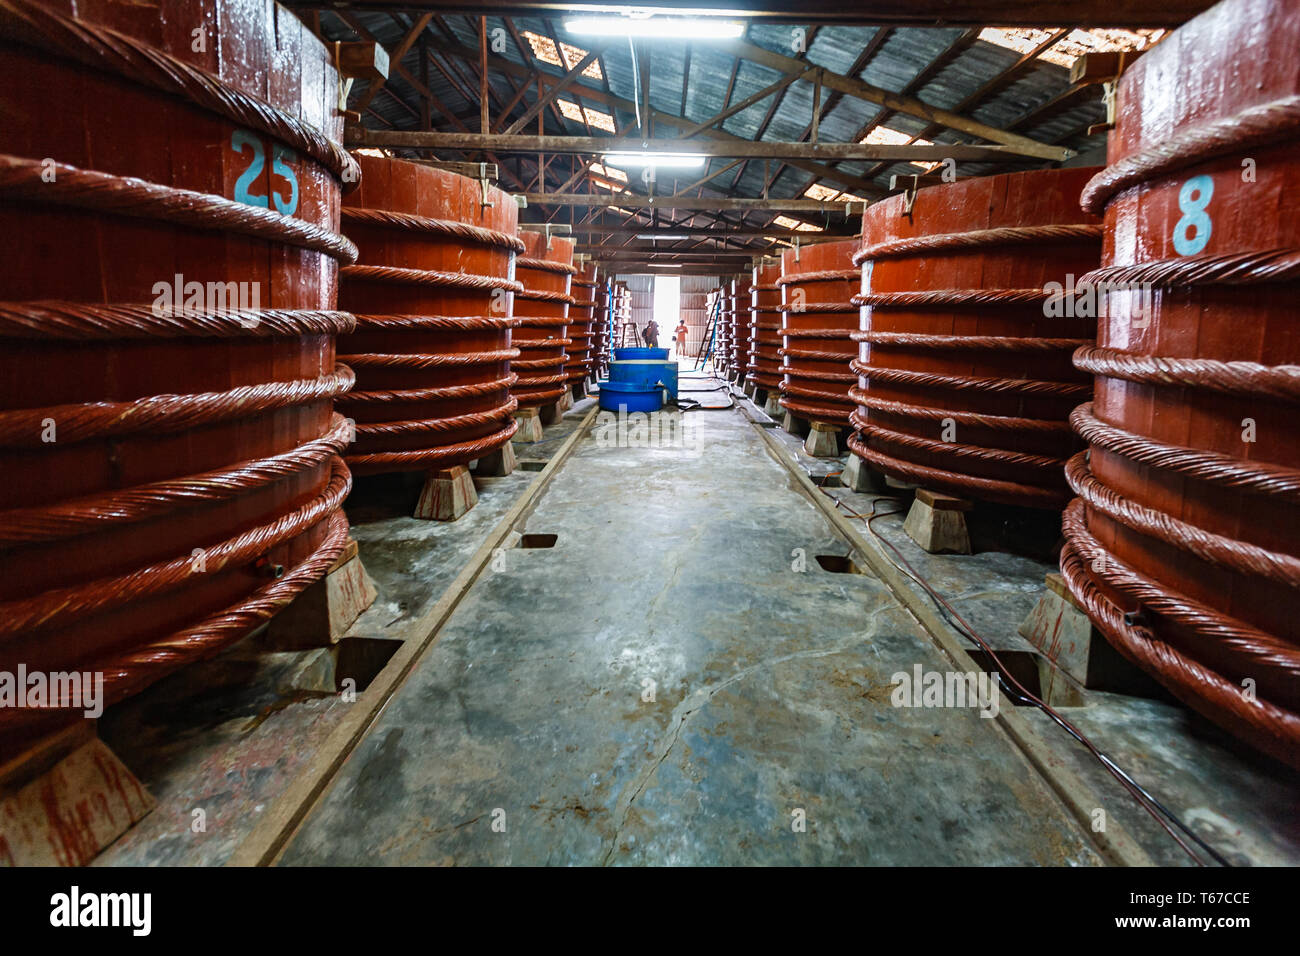 Row of huge wooden vats at a fish sauce factory where fish ferment for 1 year before bottling Stock Photo